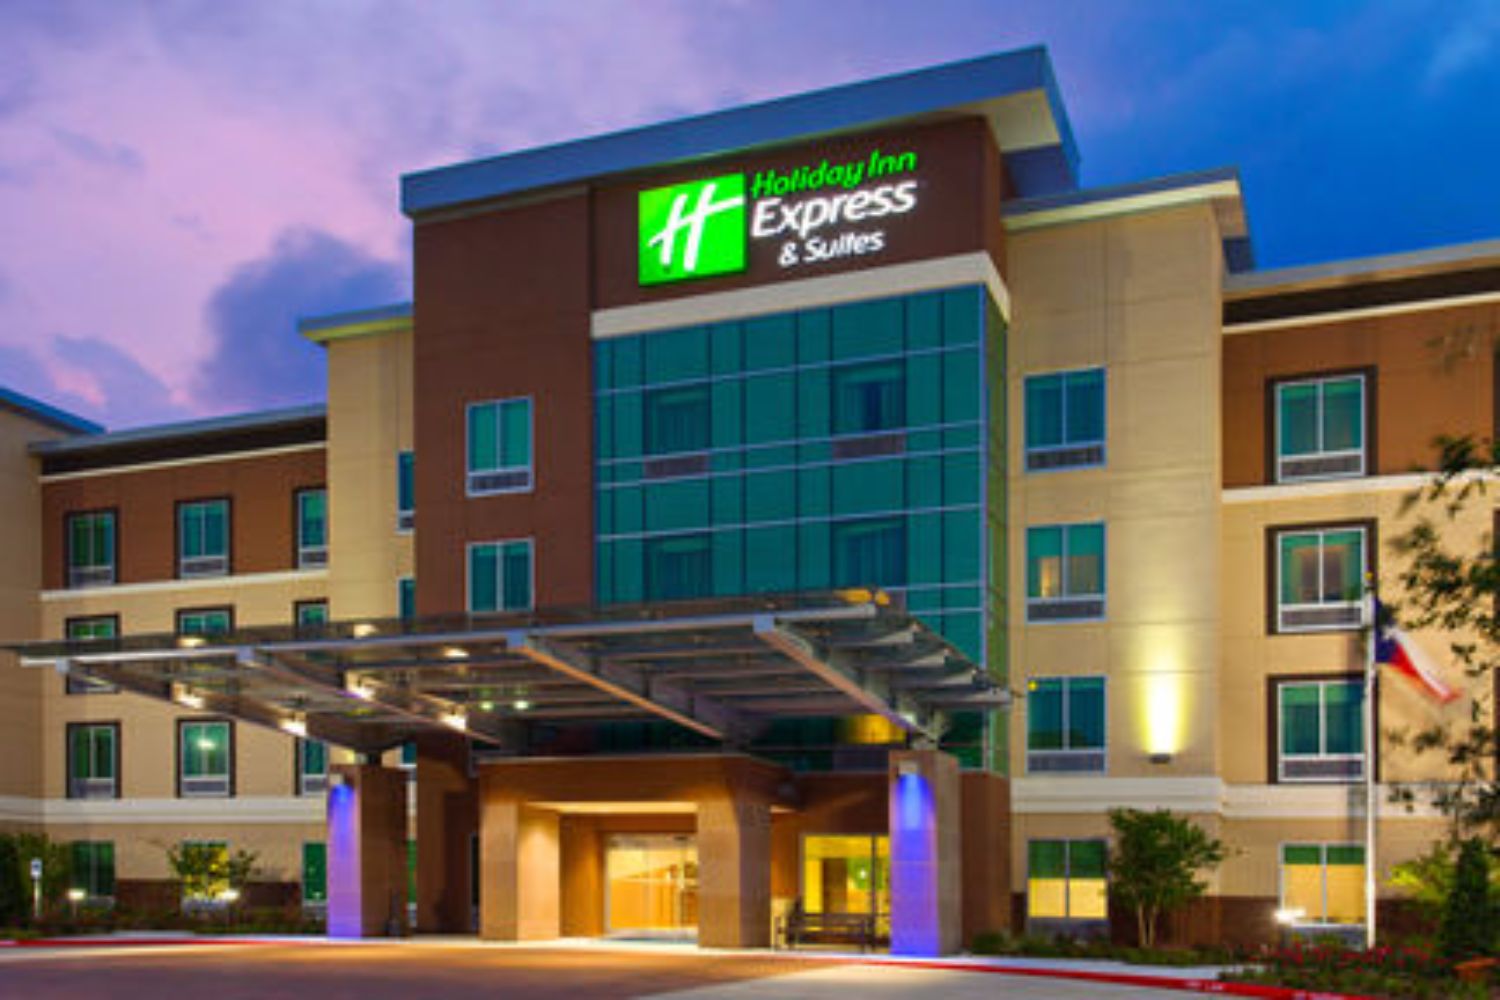 Holiday Inn Express & Suites Houston NW - Hwy 290 Cypress image 1